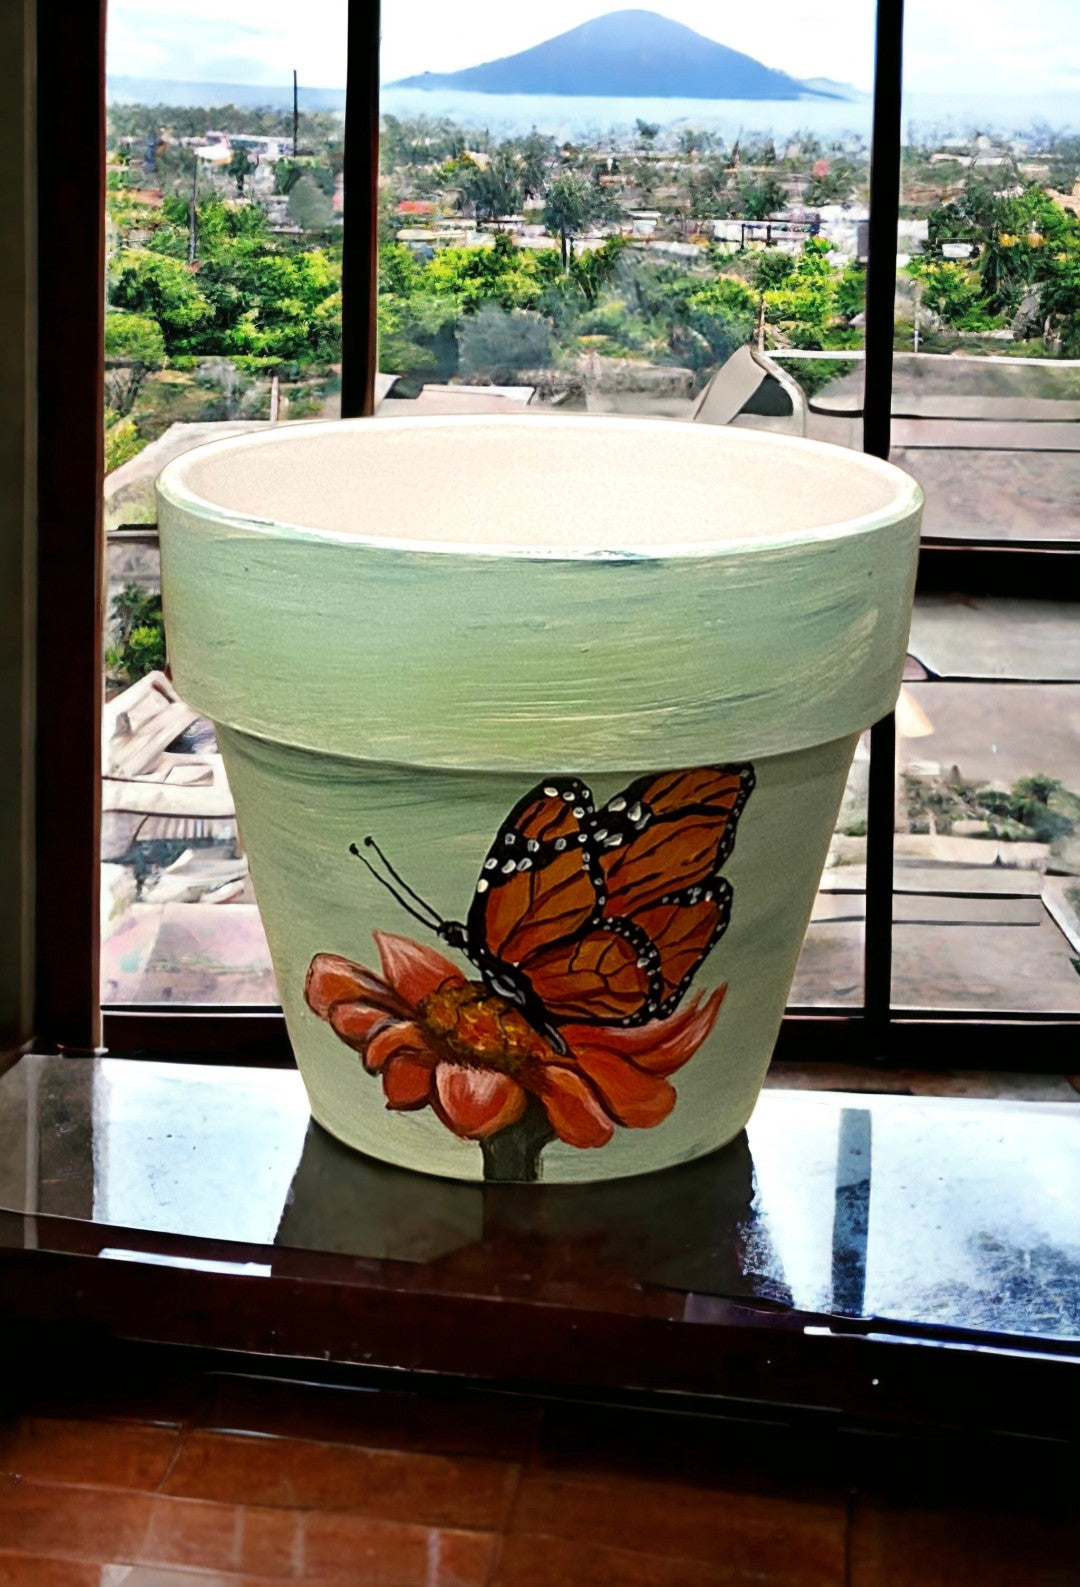 Emerald Blossoms -  A beautiful butterfly and a sunflower with green background hand-painted on a terracotta pot.